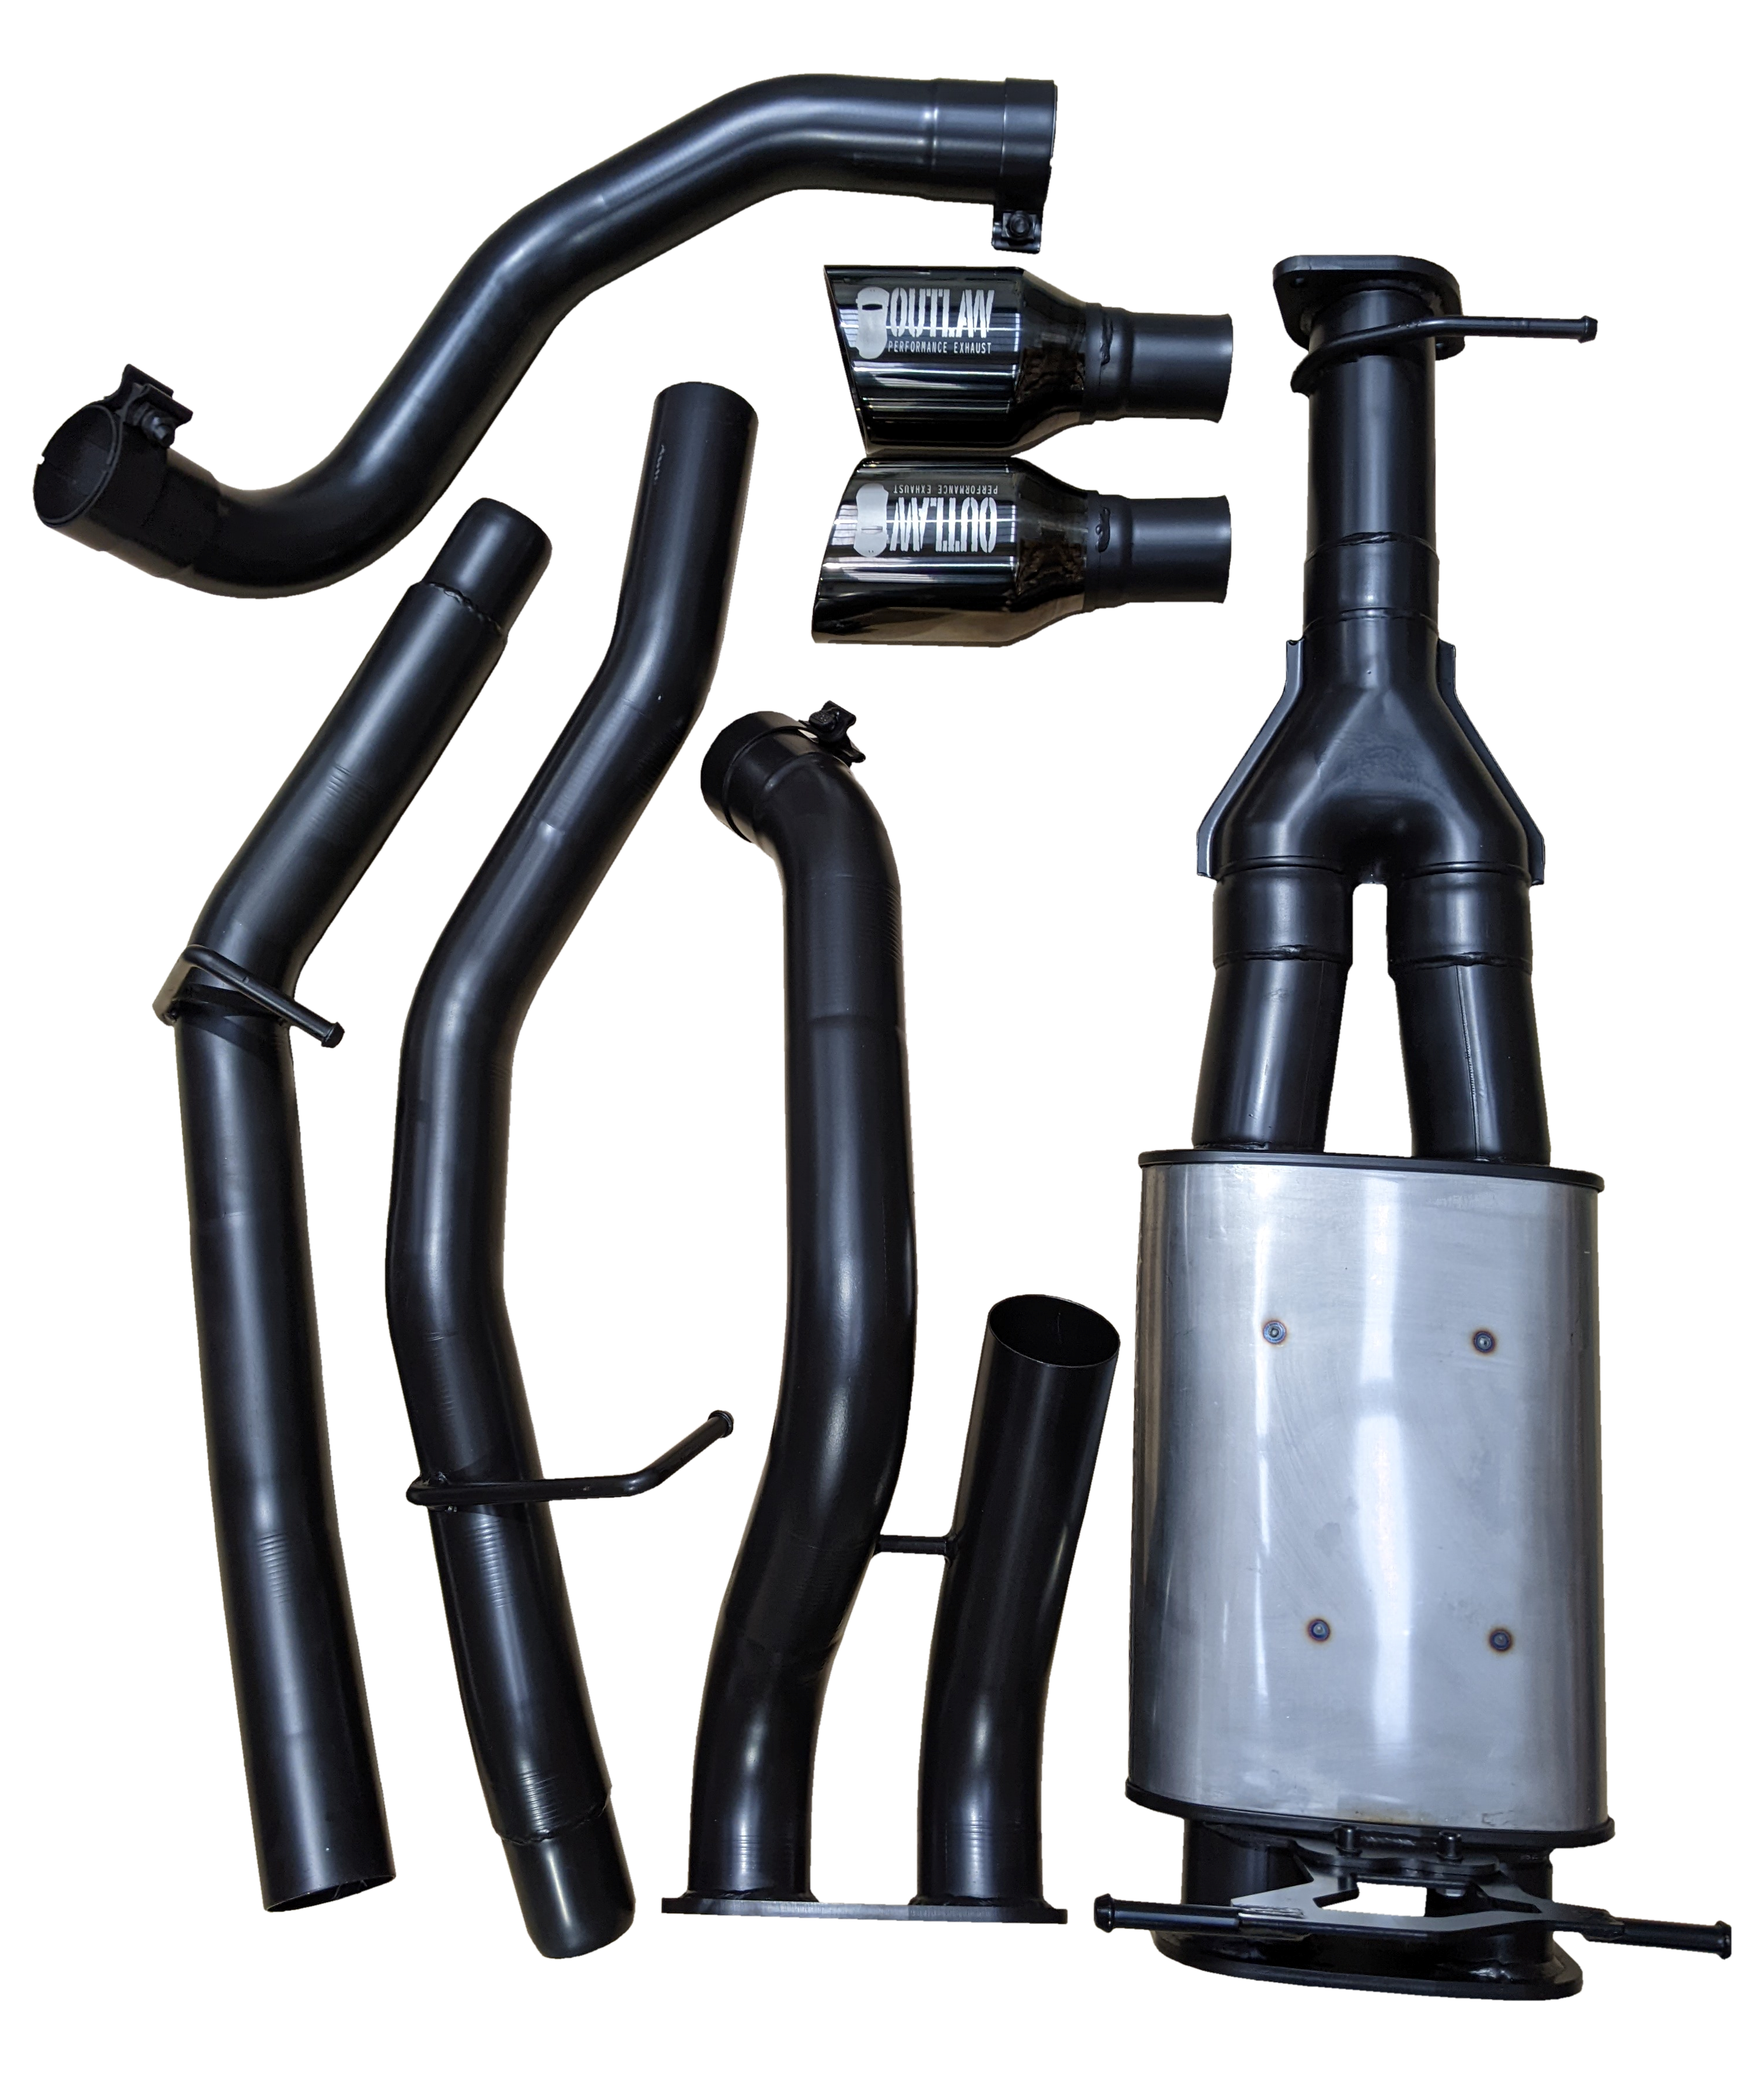 Ram DT 1500 5.7L V8 Hemi Ute 2020 - On - Catback Exhaust System With Twin 4" Black Powder Coated Tips